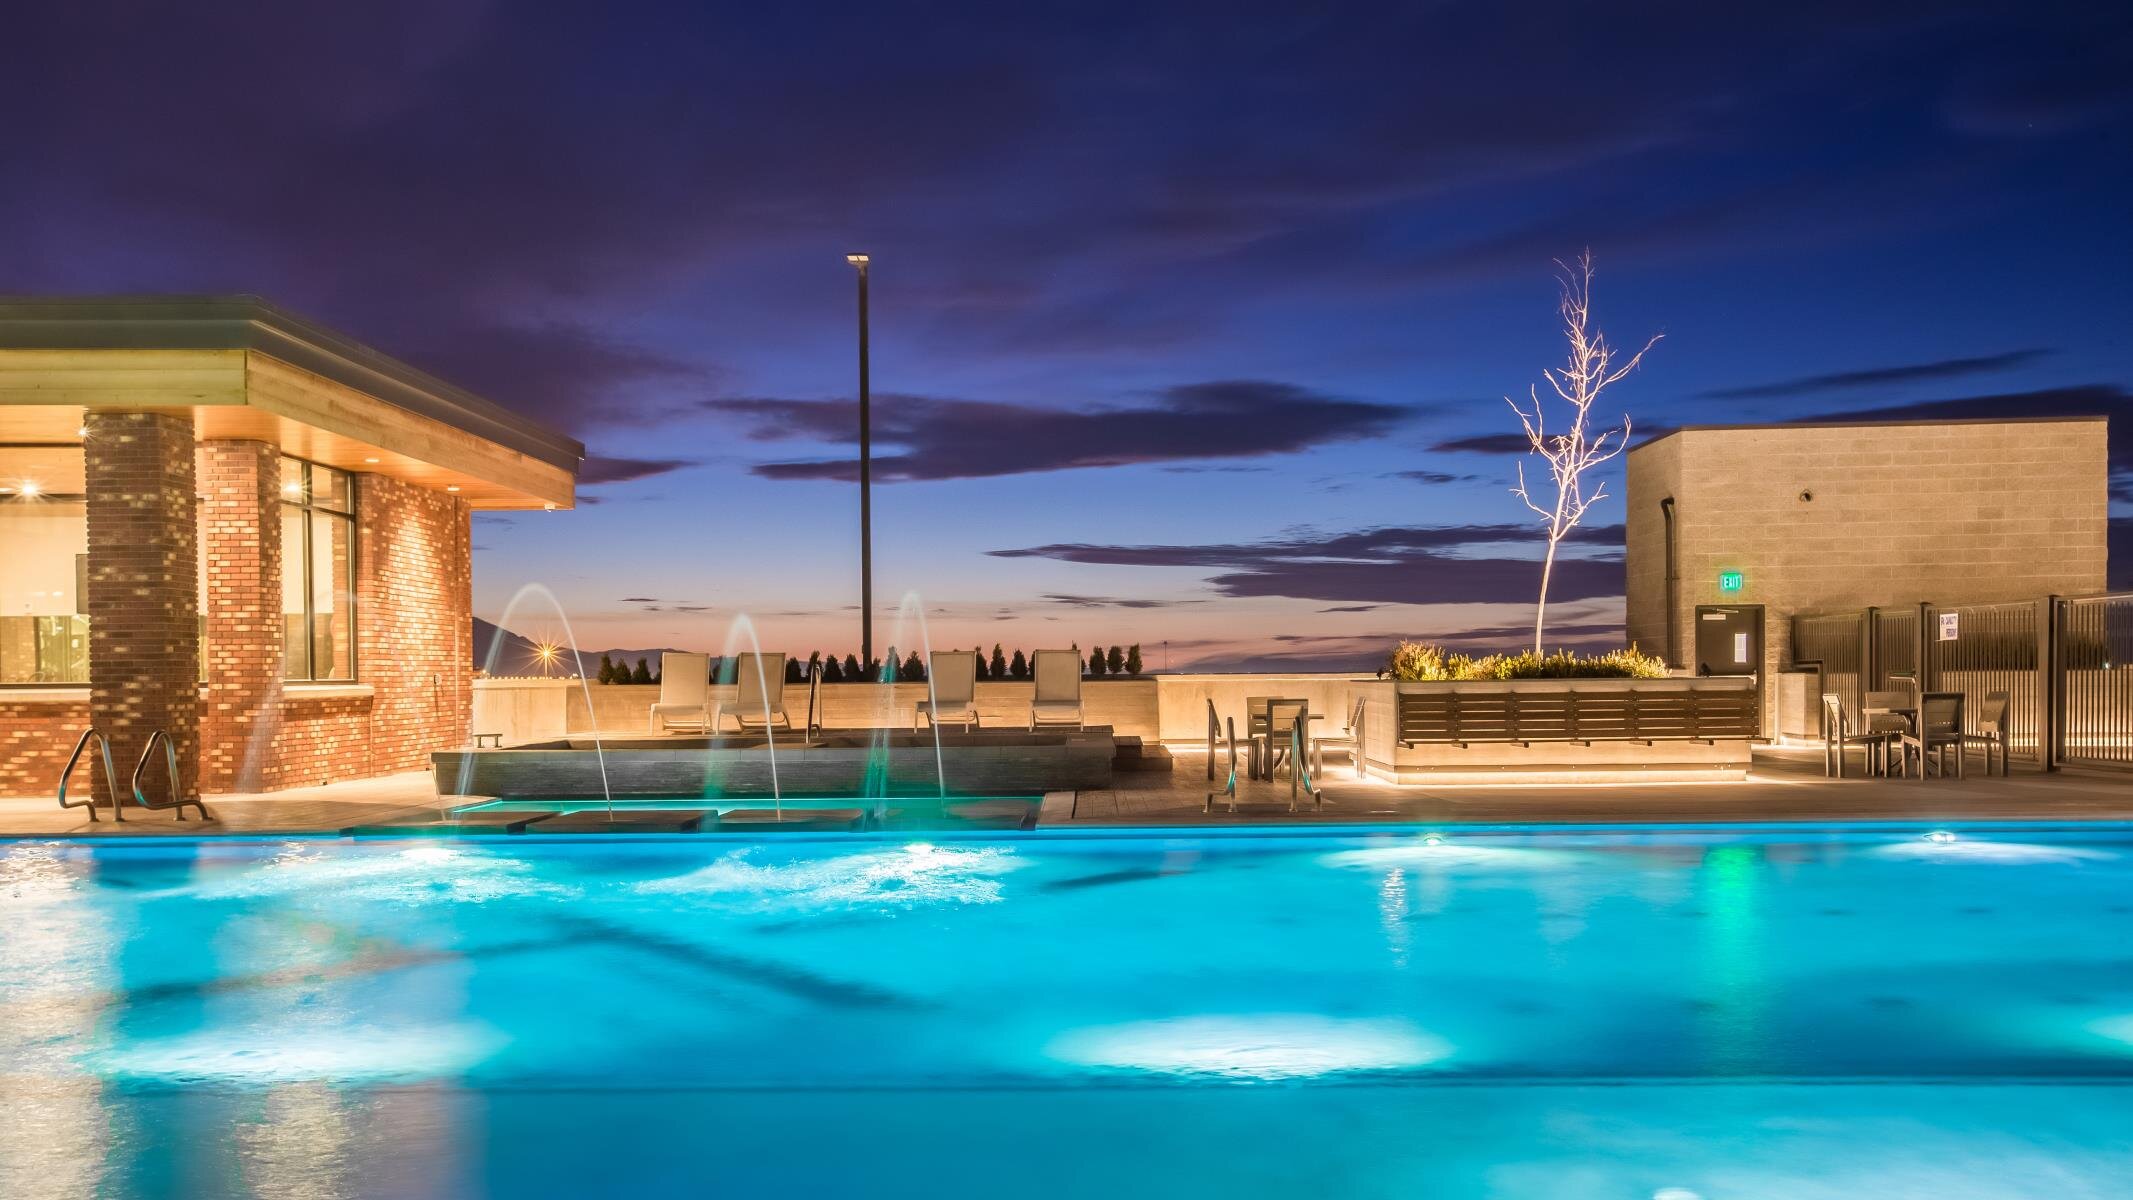  The first olympic-sized swimming pool on the largest and most exciting one-acre intensive rooftop in Utah. 